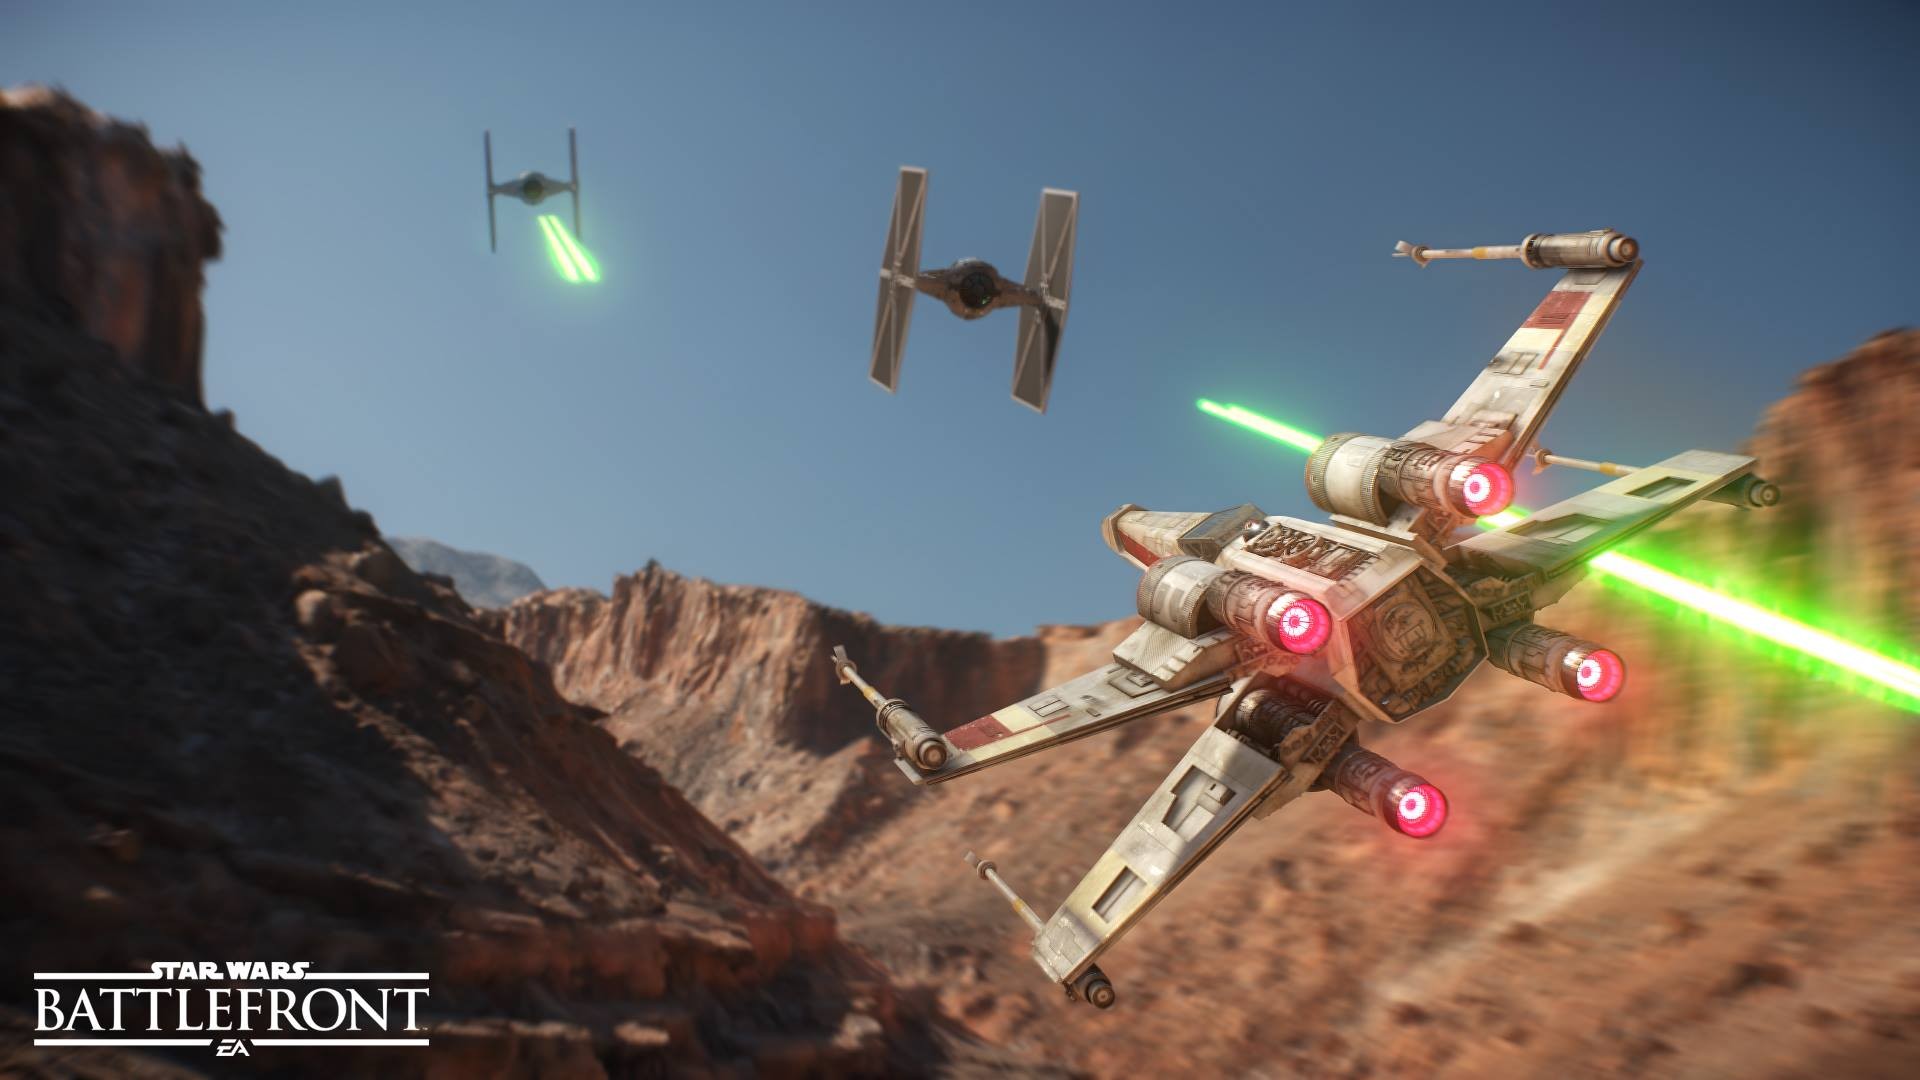 General 1920x1080 Star Wars Star Wars: Battlefront X-wing TIE Fighter Tatooine dogfight video games PC gaming video game art battle science fiction Star Wars Ships Electronic Arts EA DICE